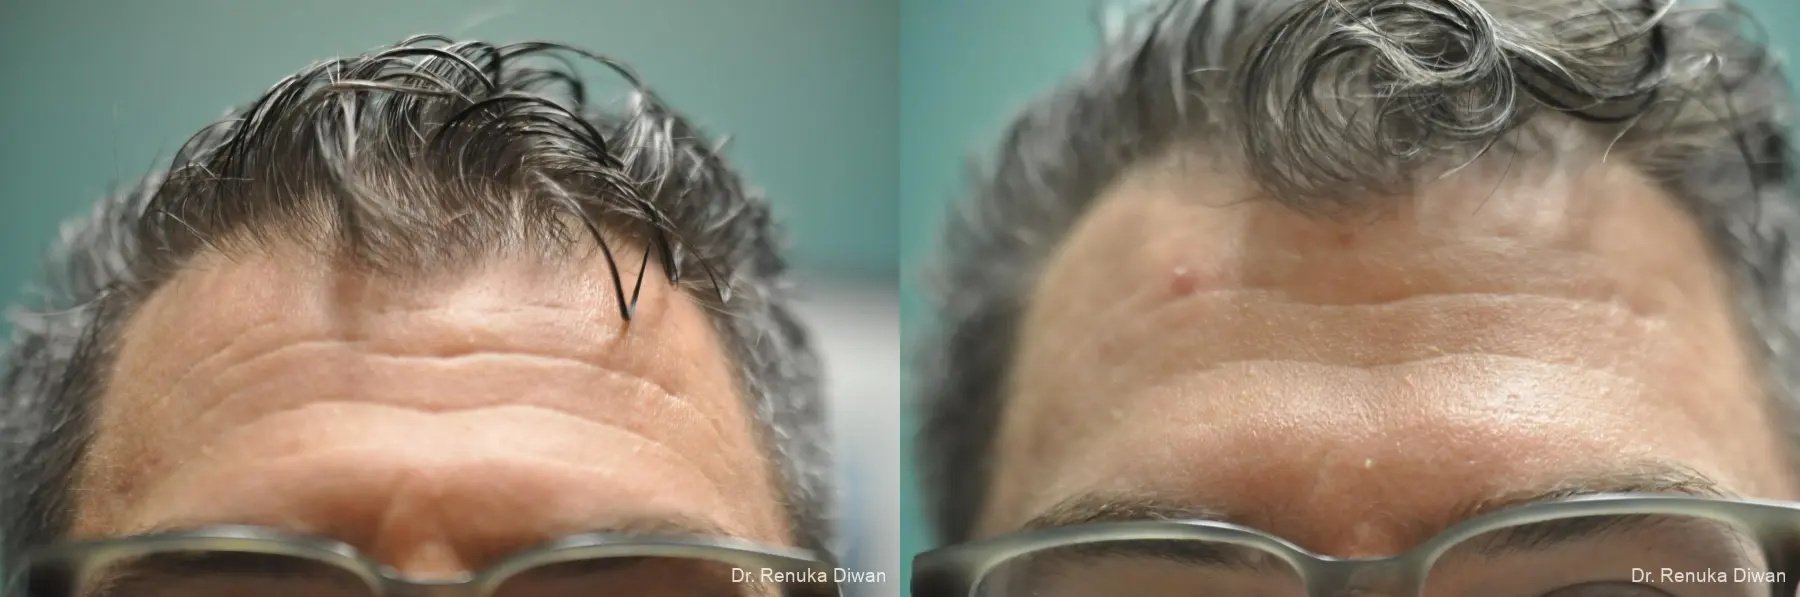 Botox-cosmetic-for-men: Patient 7 - Before and After  